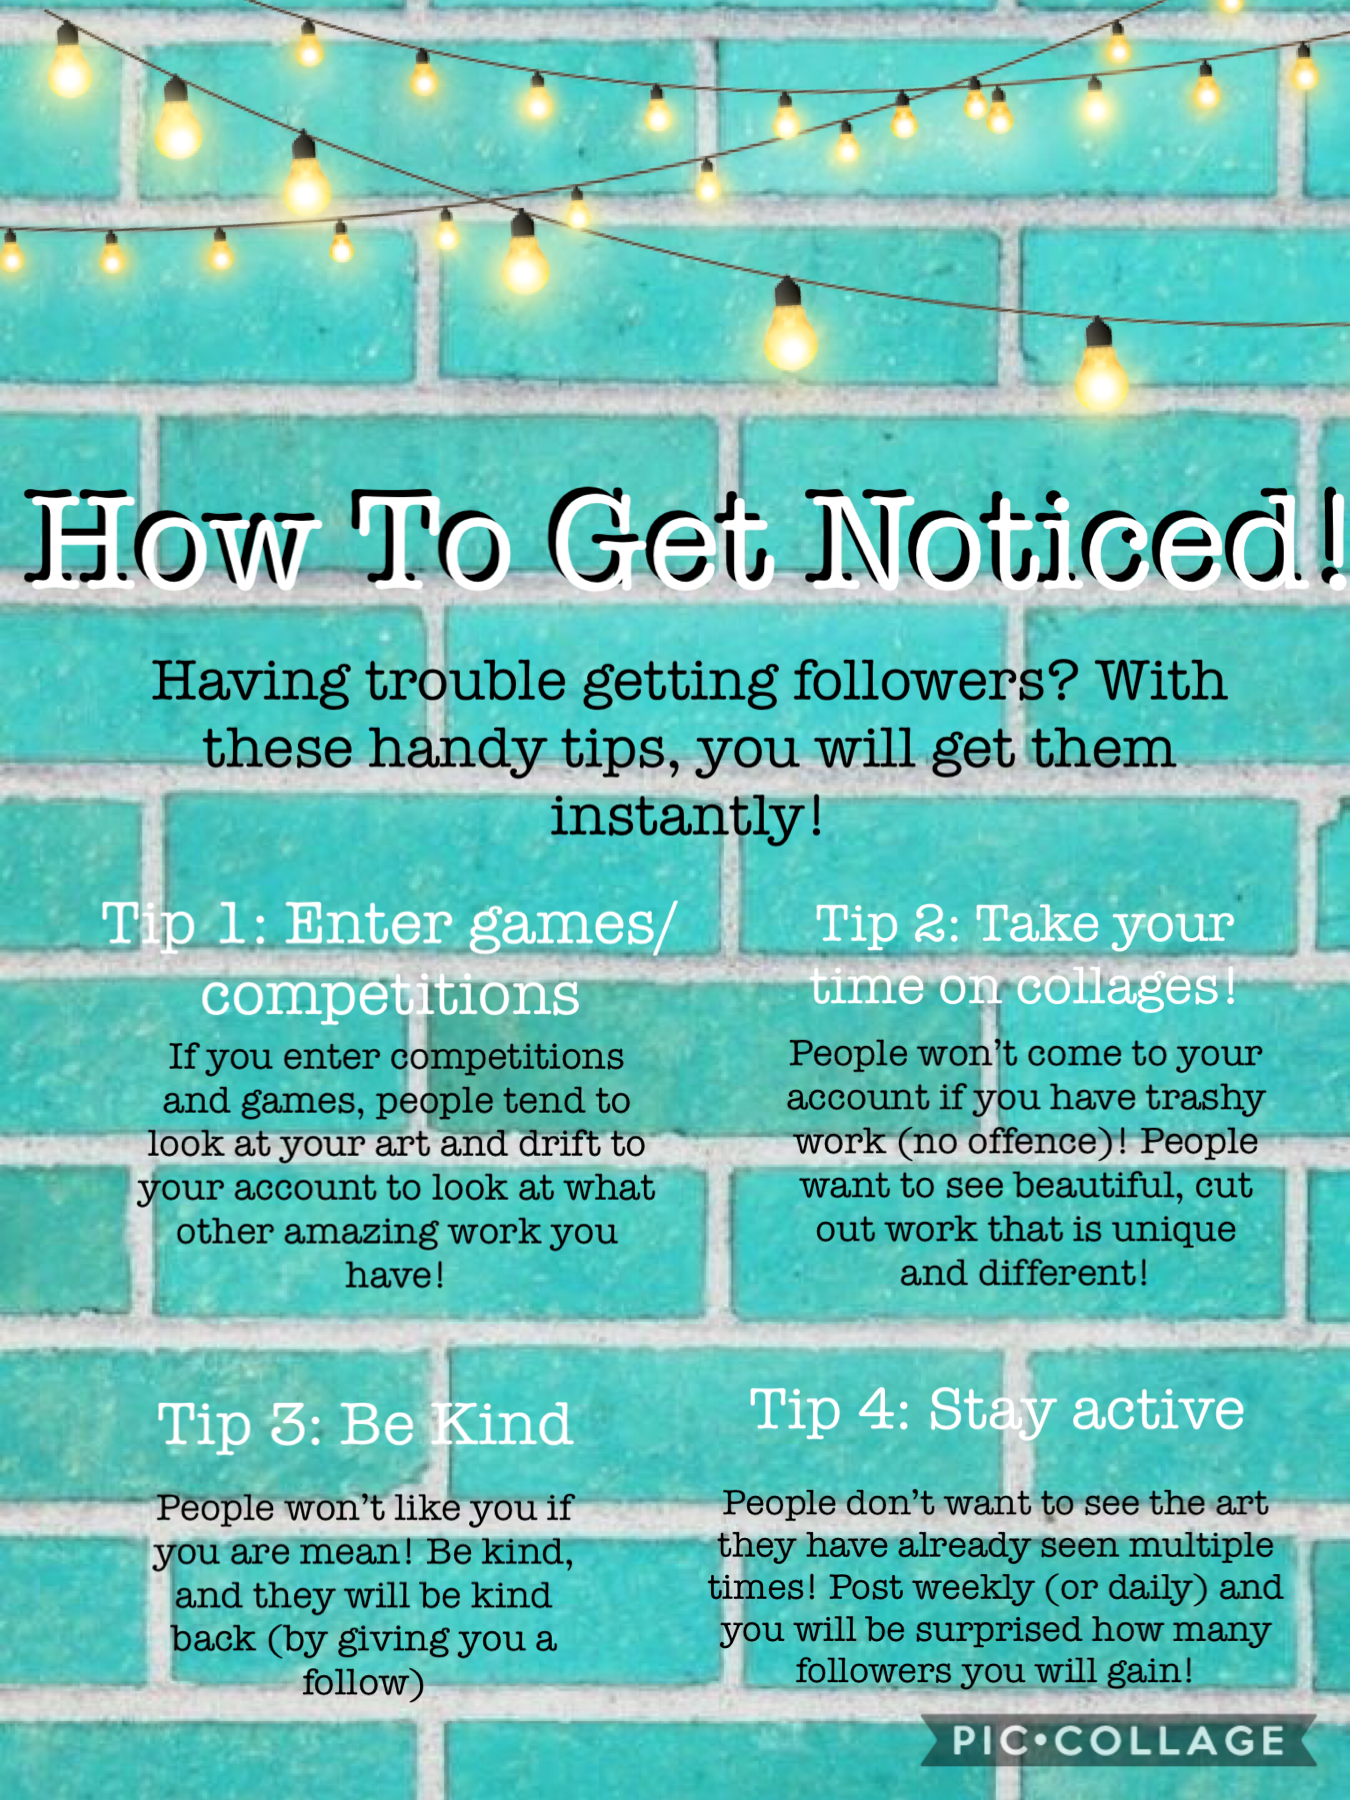 How To Get Noticed!